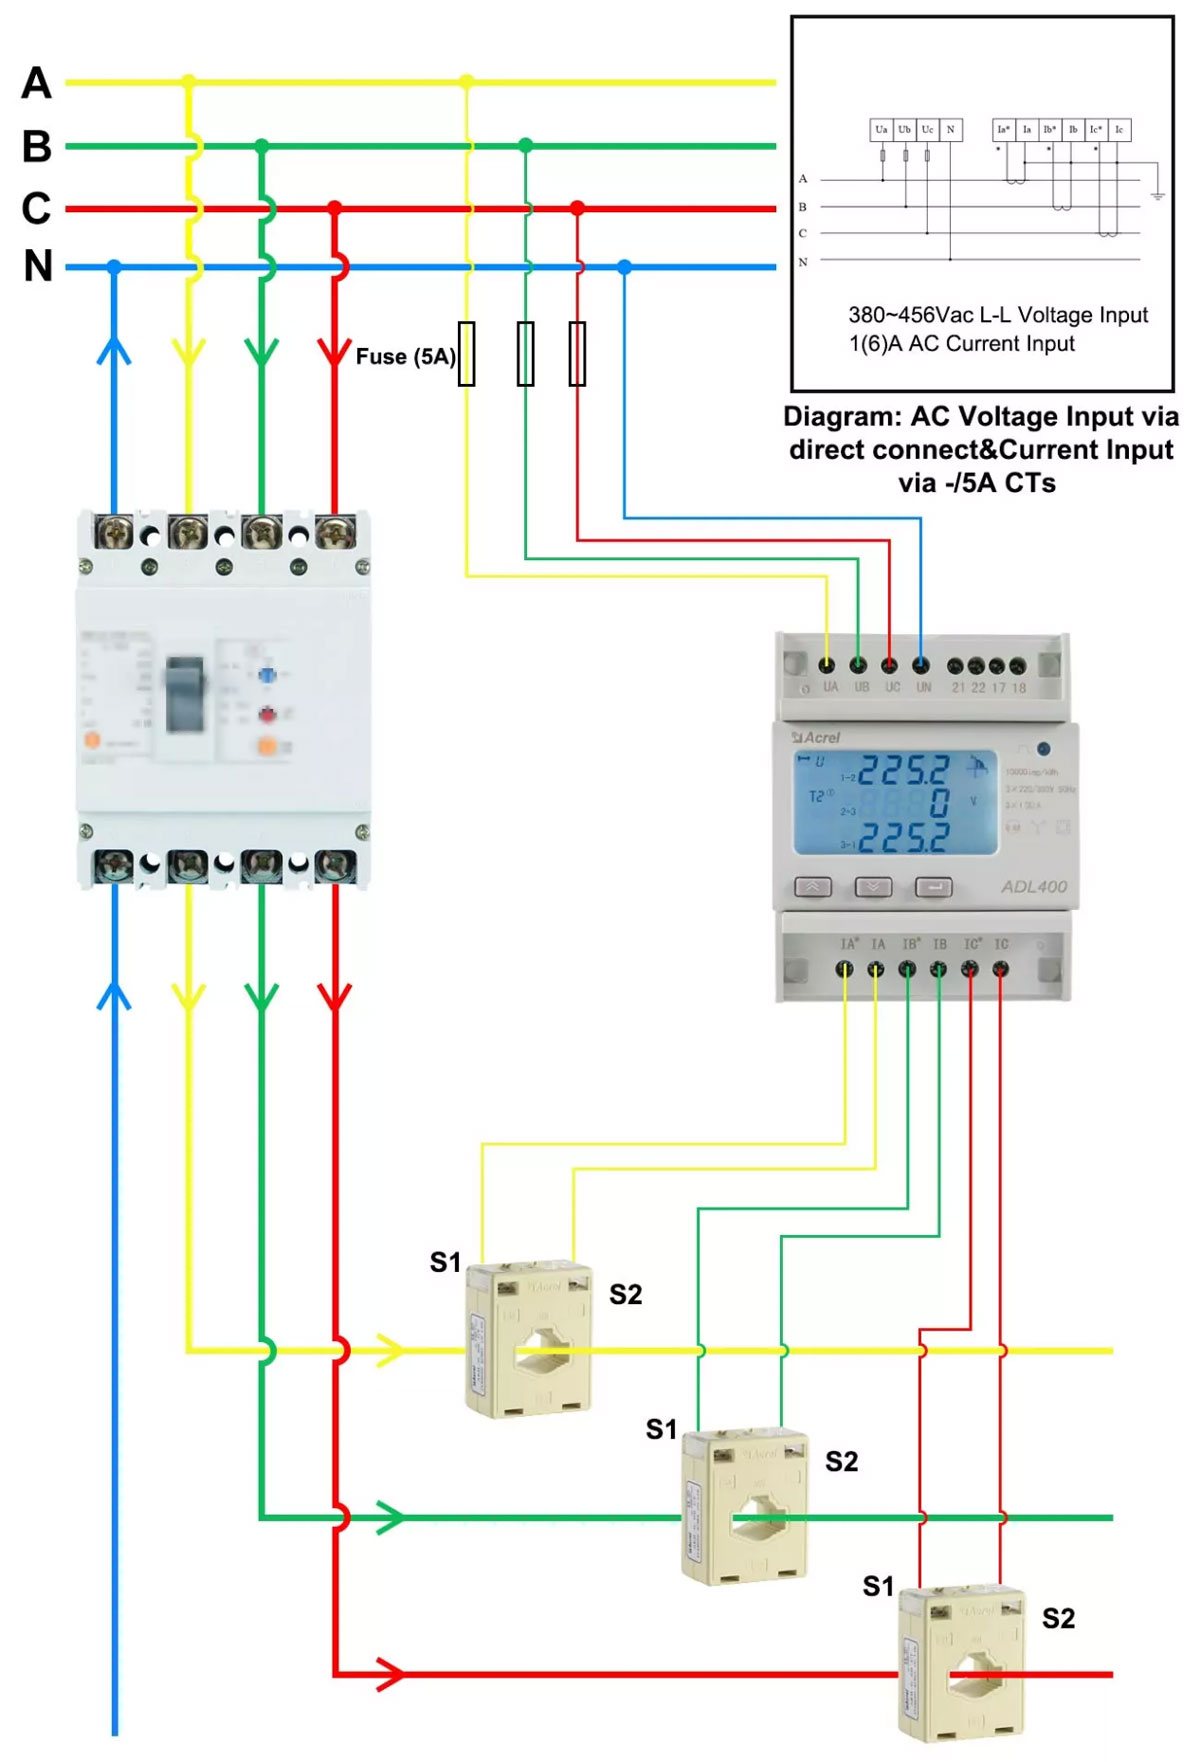 Power-Wiring-3-phase-4-wire-CT-operated.jpg